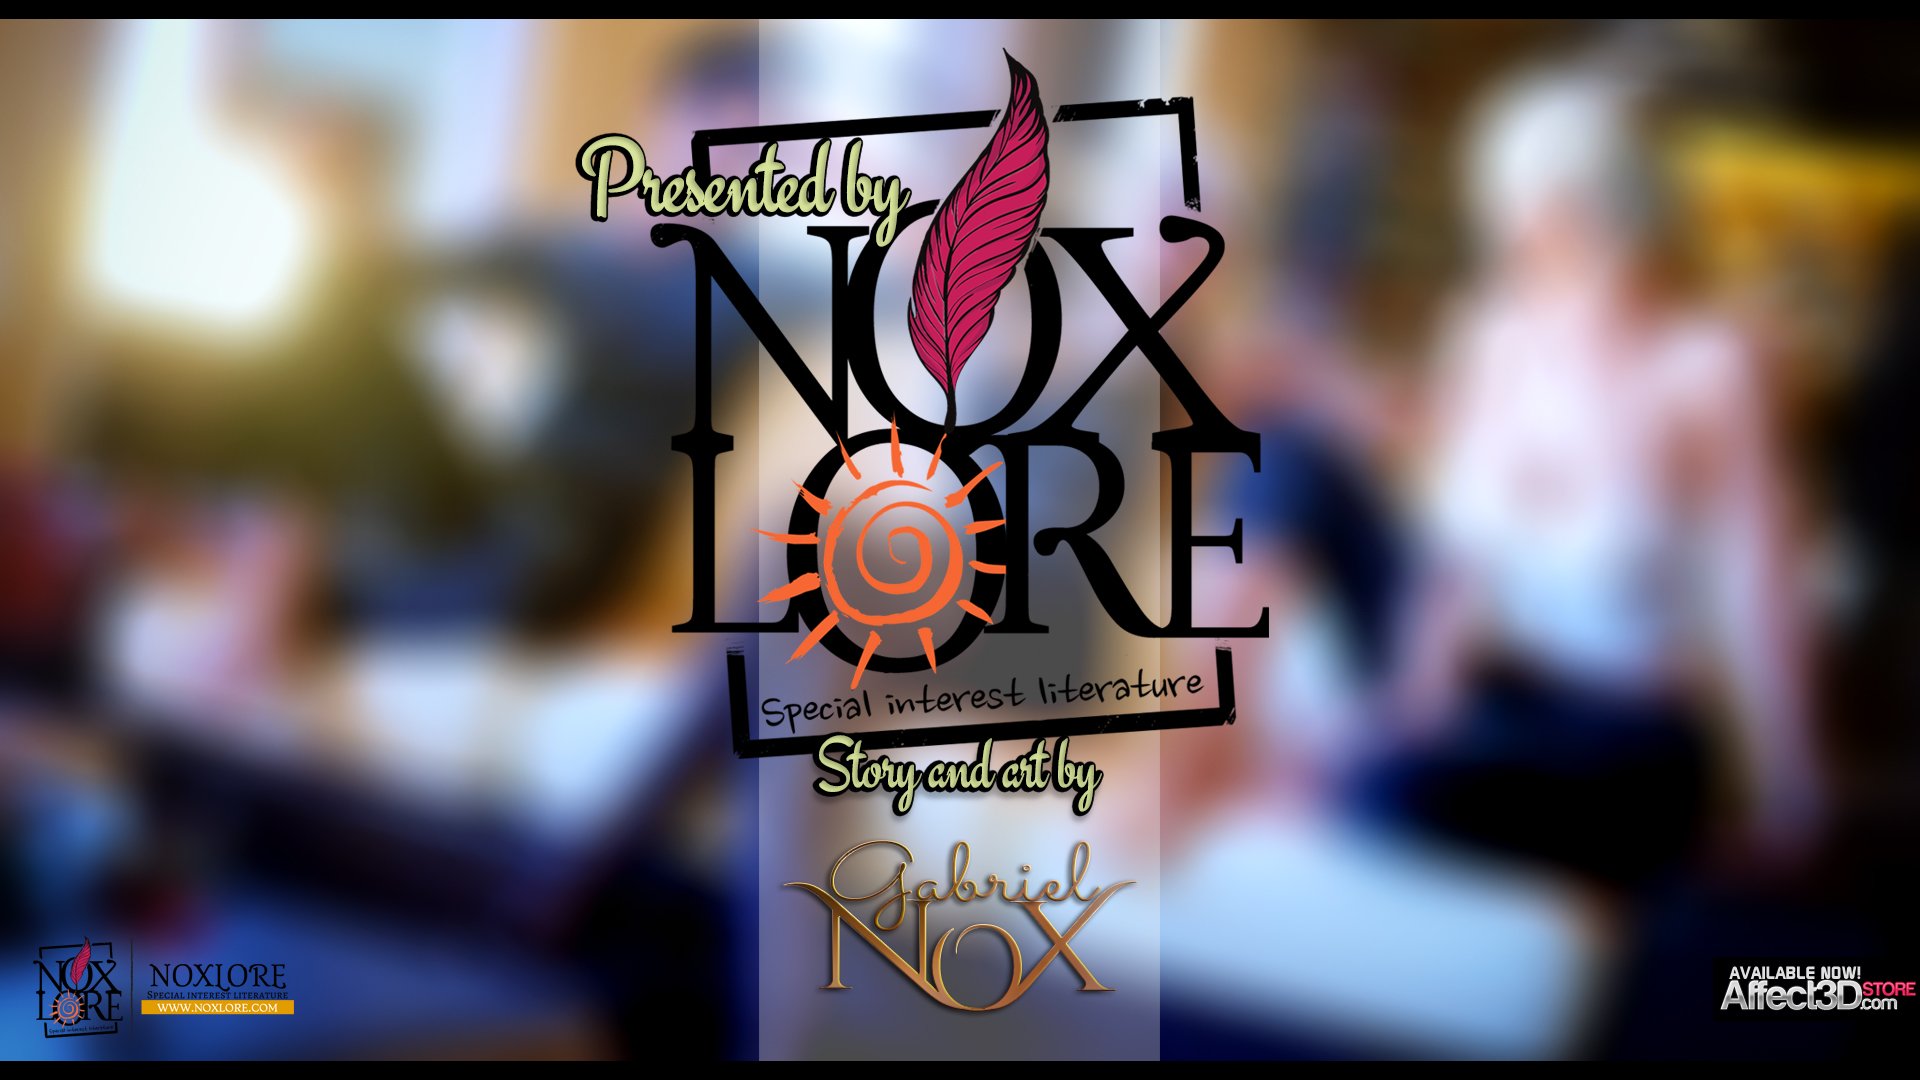 FREE Comic! Read the Prologue to Nature of Nurture, an upcoming graphic novel by Nox